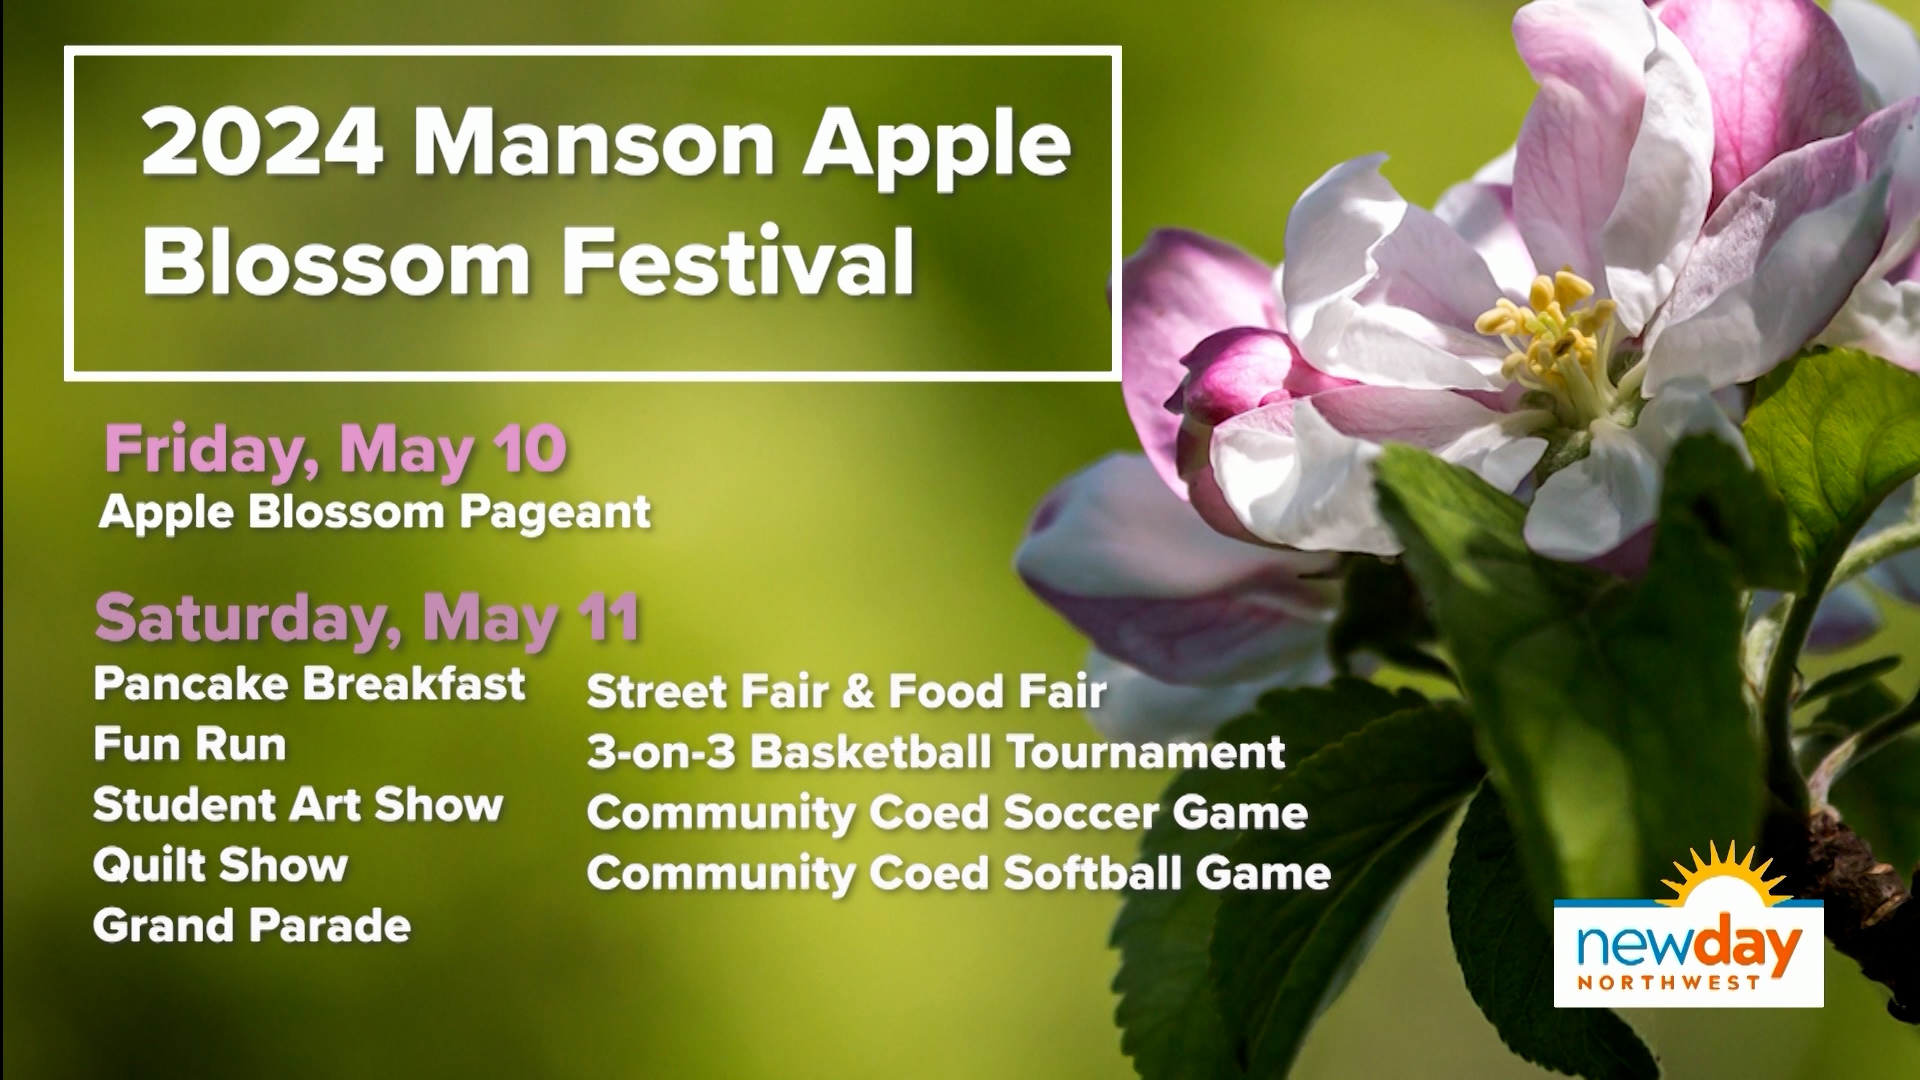 The Manson Apple Blossom Festival runs from May 10th and 11th. Sponsored by Lake Chelan Chamber of Commerce.